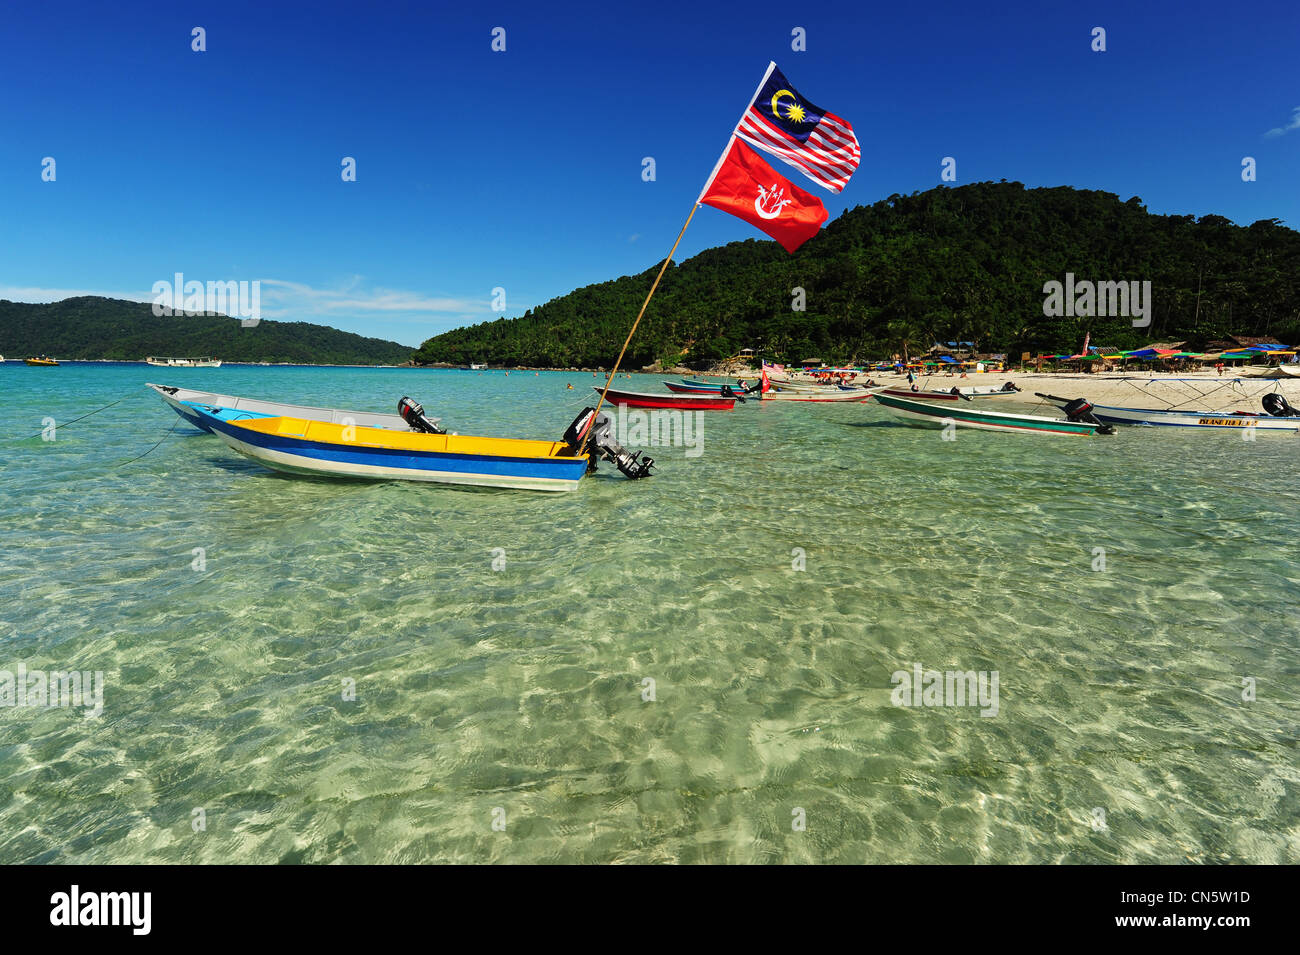 Malaysia, Terengganu State, Perhentian Islands, Perhentian Kecil, transparent turquoise see and white sand beach Stock Photo